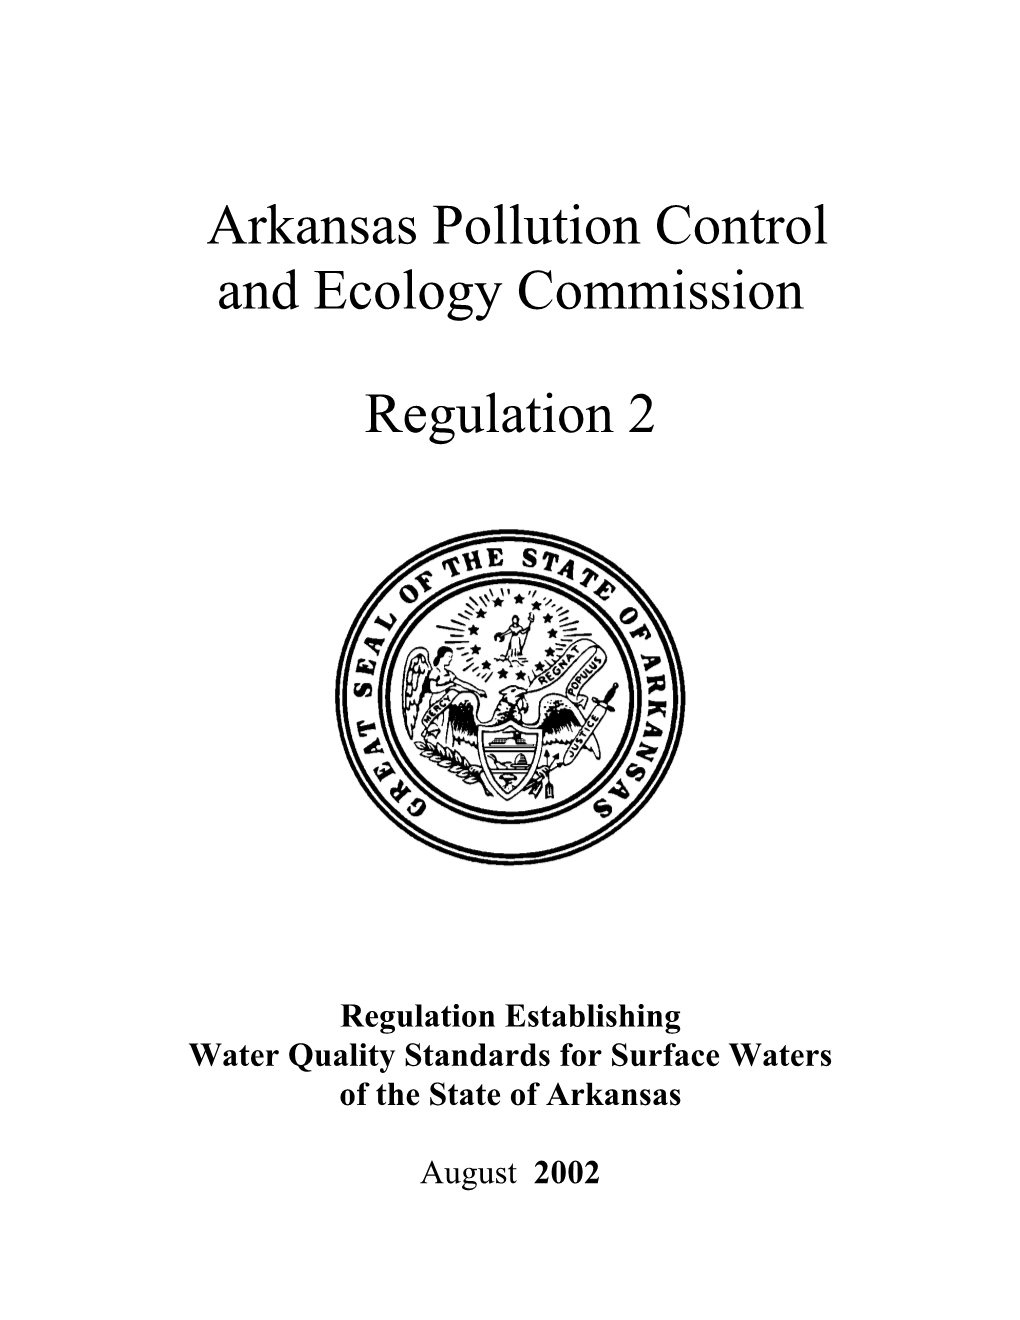 Pollution Control and Ecology Commission